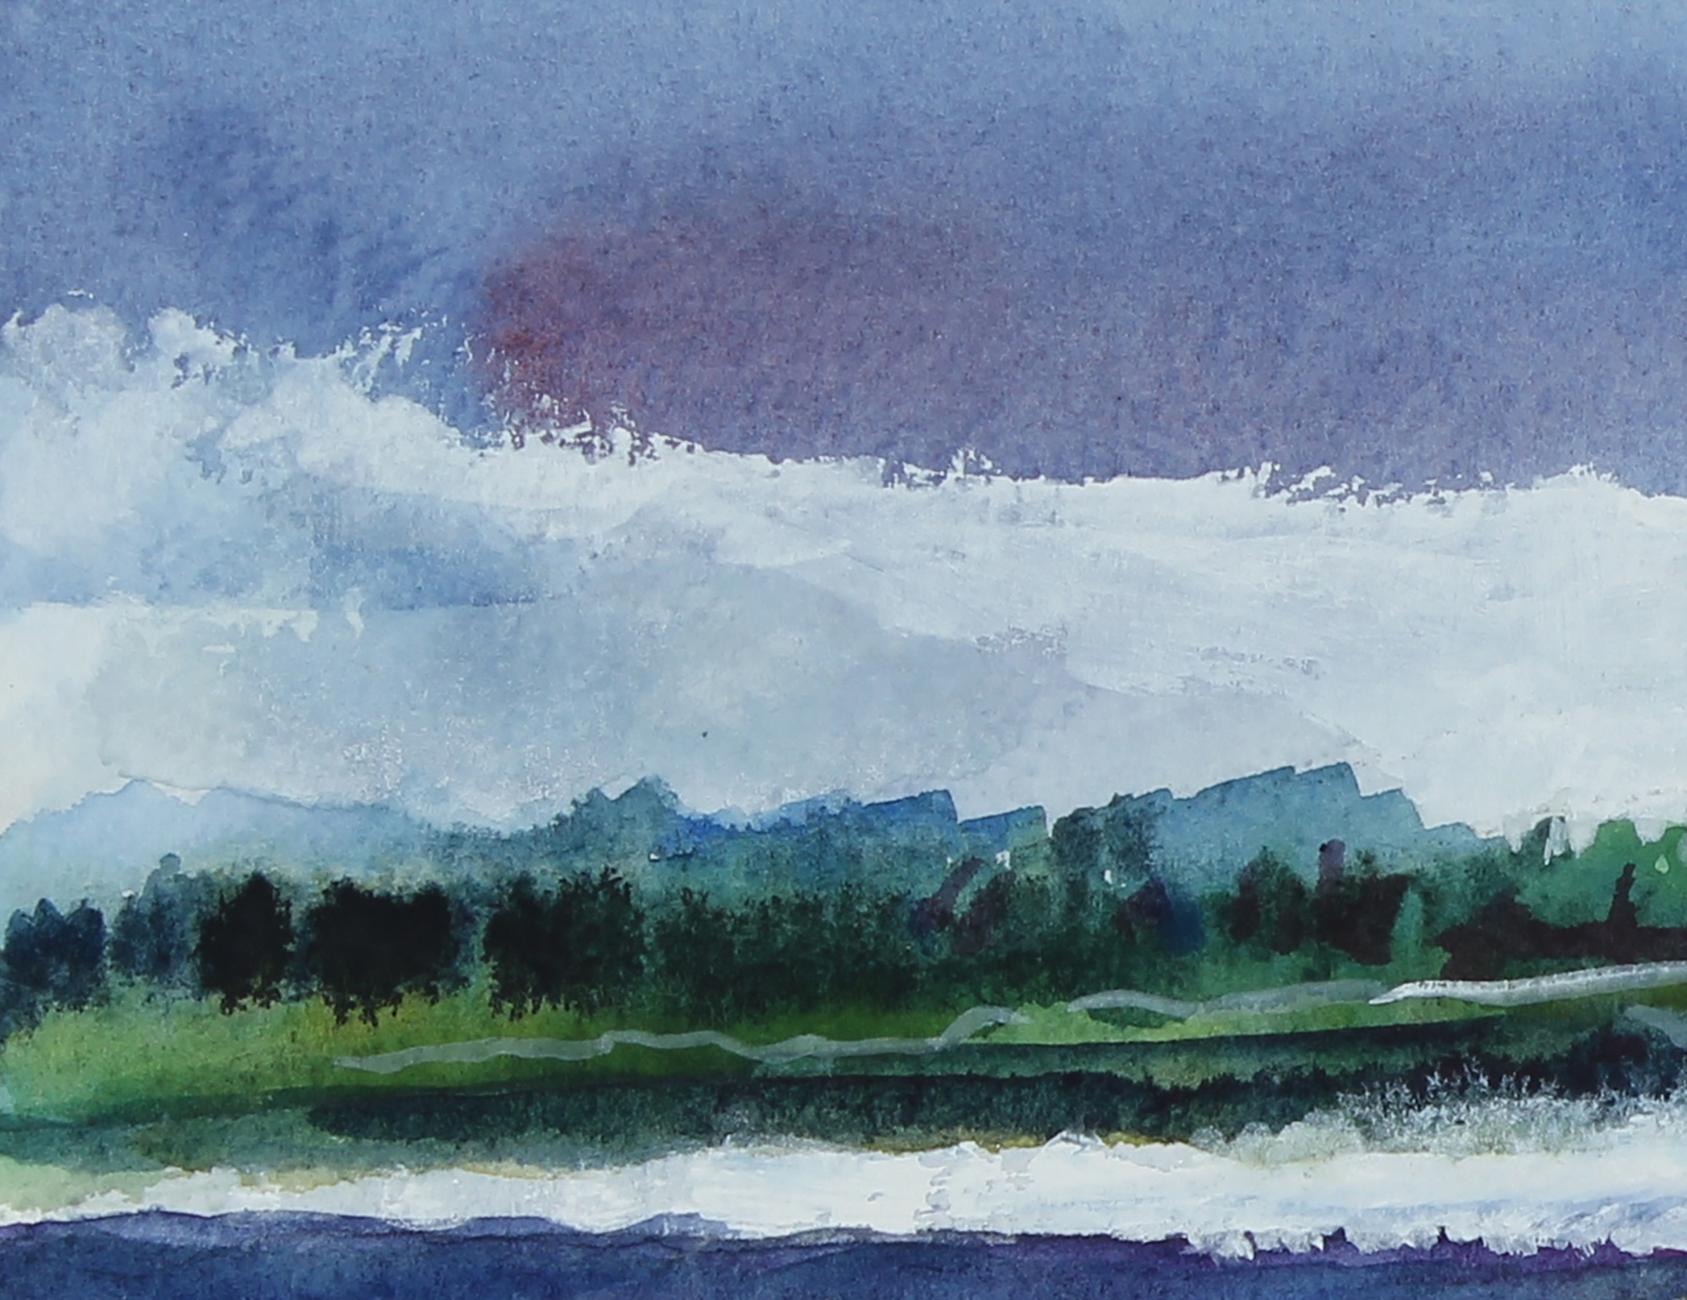 Colorful 20th Century Northern California Seascape in Watercolor on Paper  - Art by Alysanne McGaffey